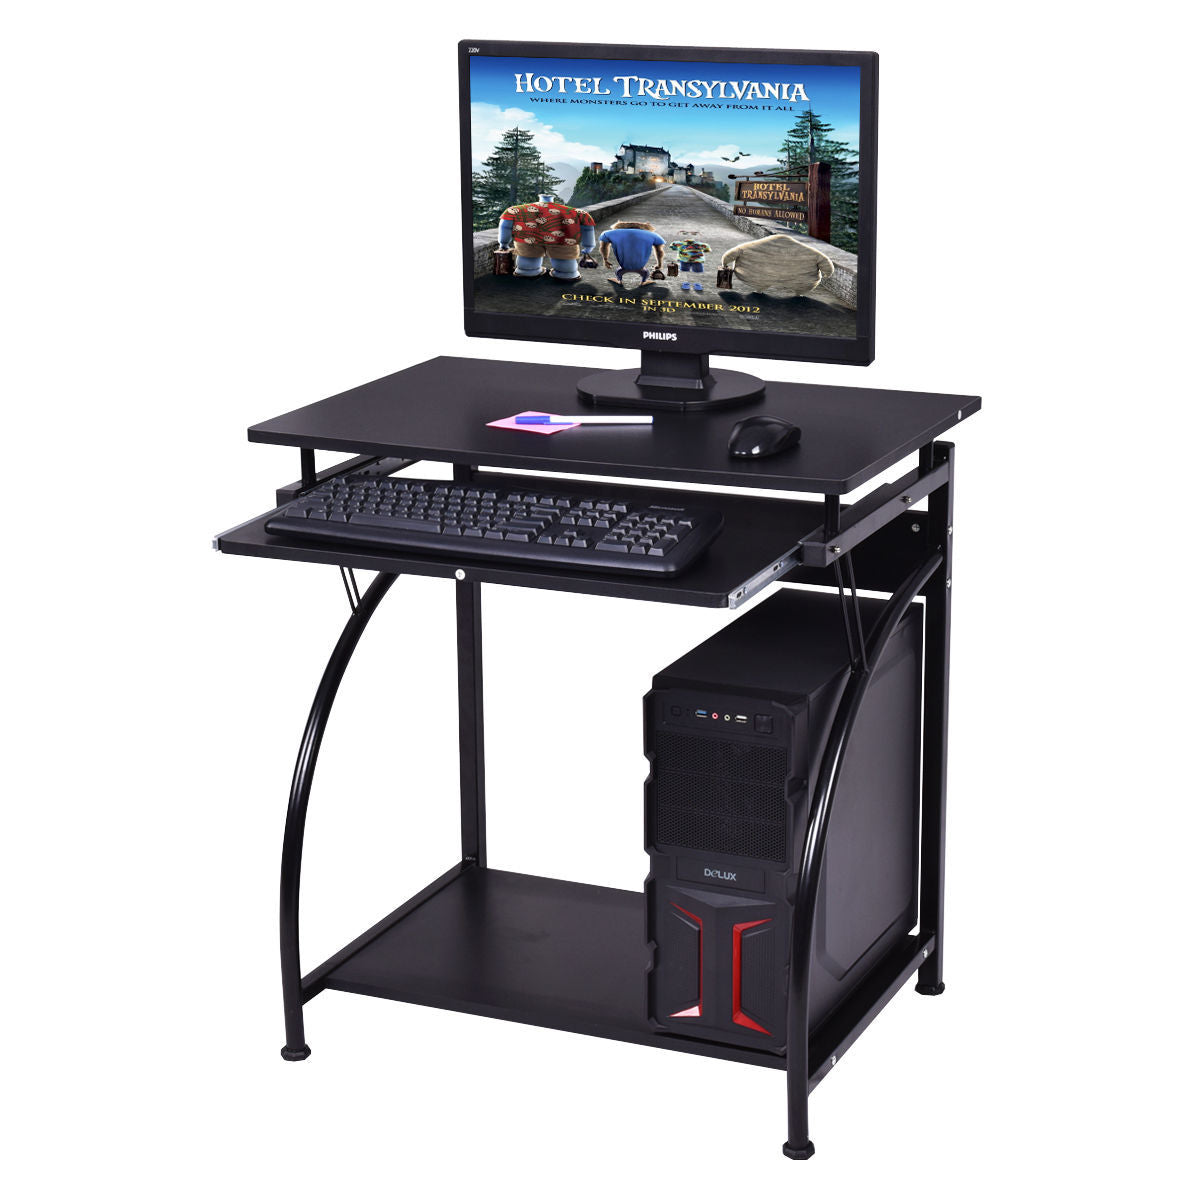 27.5 Inch Laptop Table Computer Desk for Small Spaces with Pull-out Keyboard Tray - Color: Black